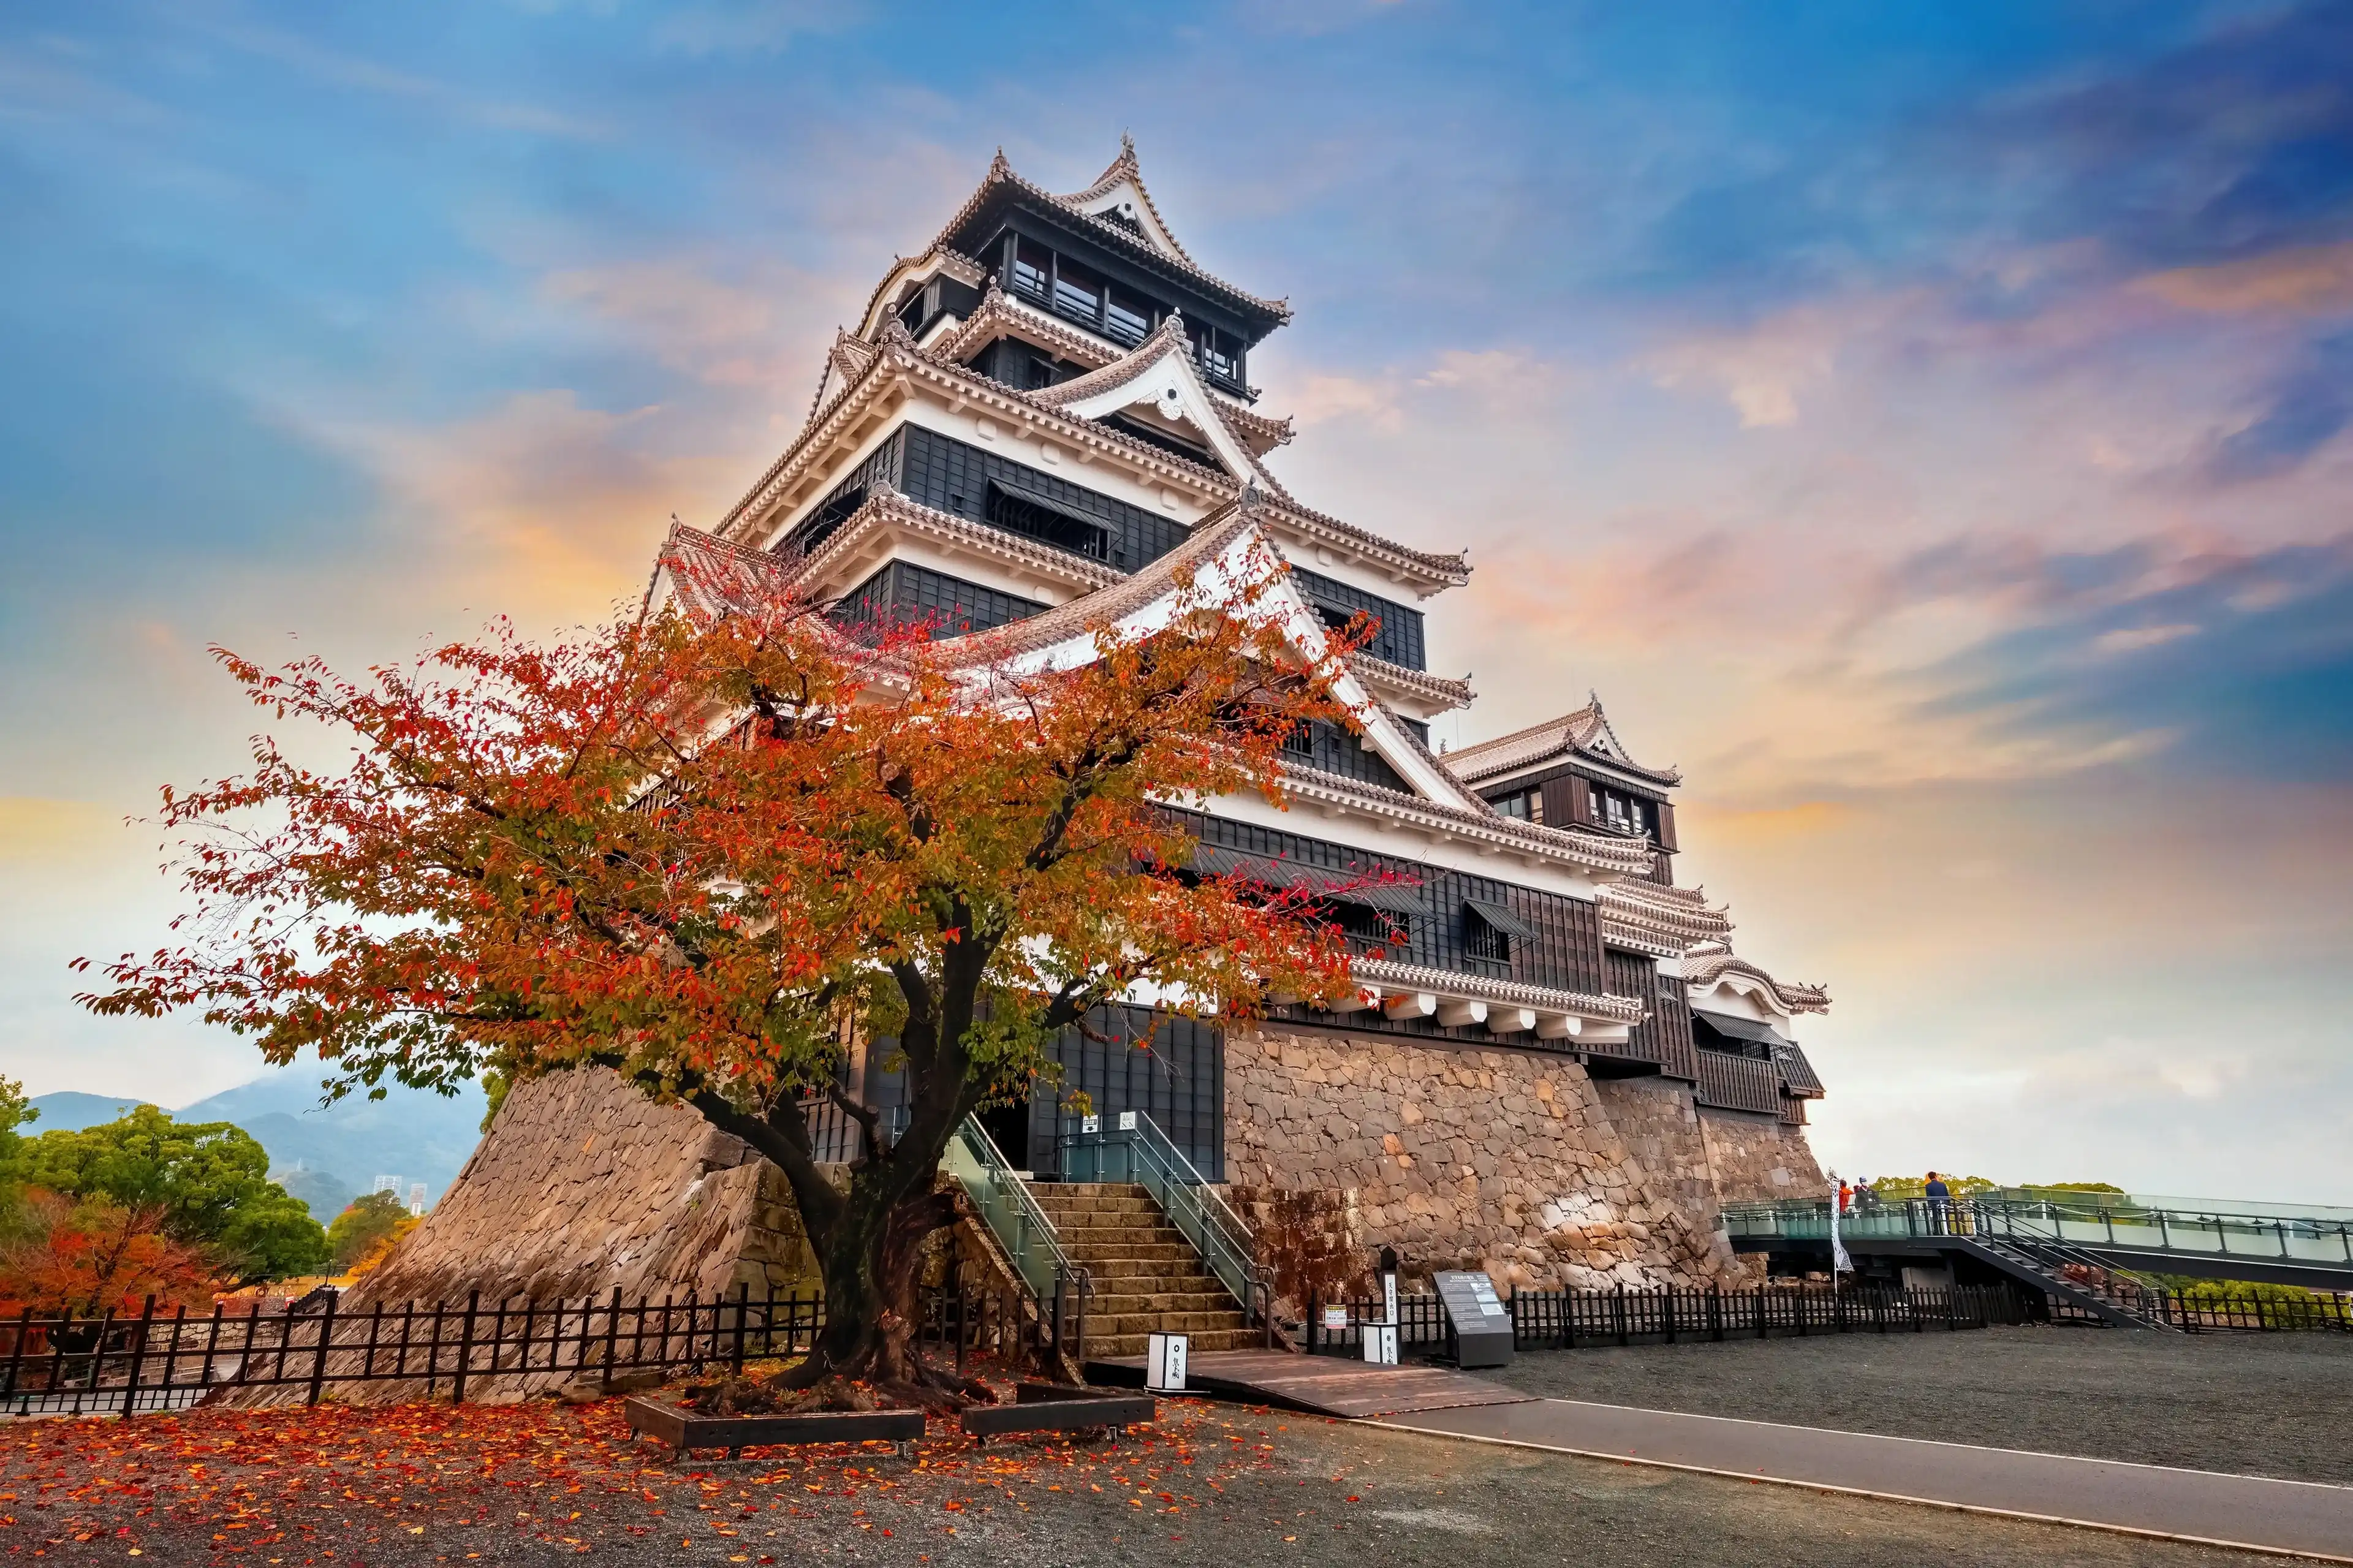 Kumamoto, Japan - Nov 23 2022: Kumamoto Castle's history dates to 1467. In 2006, Kumamoto Castle was listed as one of the 100 Fine Castles of Japan by the Japan Castle Foundation